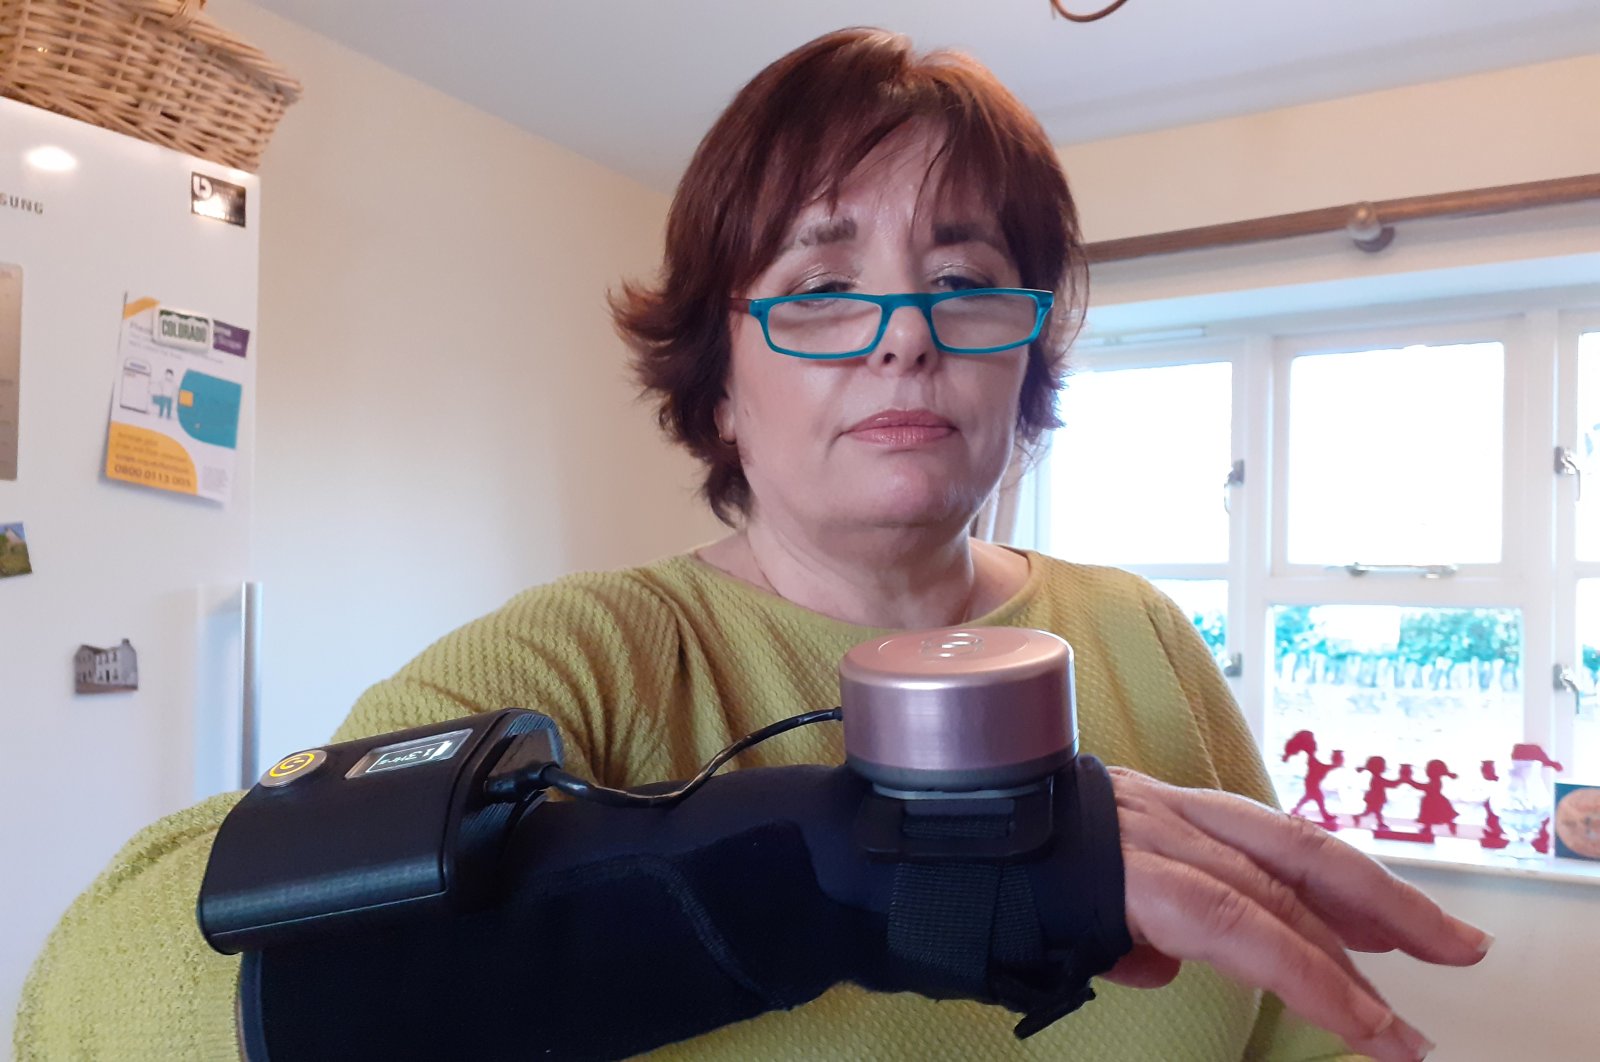 Business analyst Jenny Field wears a glove with a built-in spinning gyroscope that helps people with Parkinson's disease and essential tremor stop their hands from shaking, at her home near Towcester, Britain, Dec. 15, 2020. (REUTERS Photo)